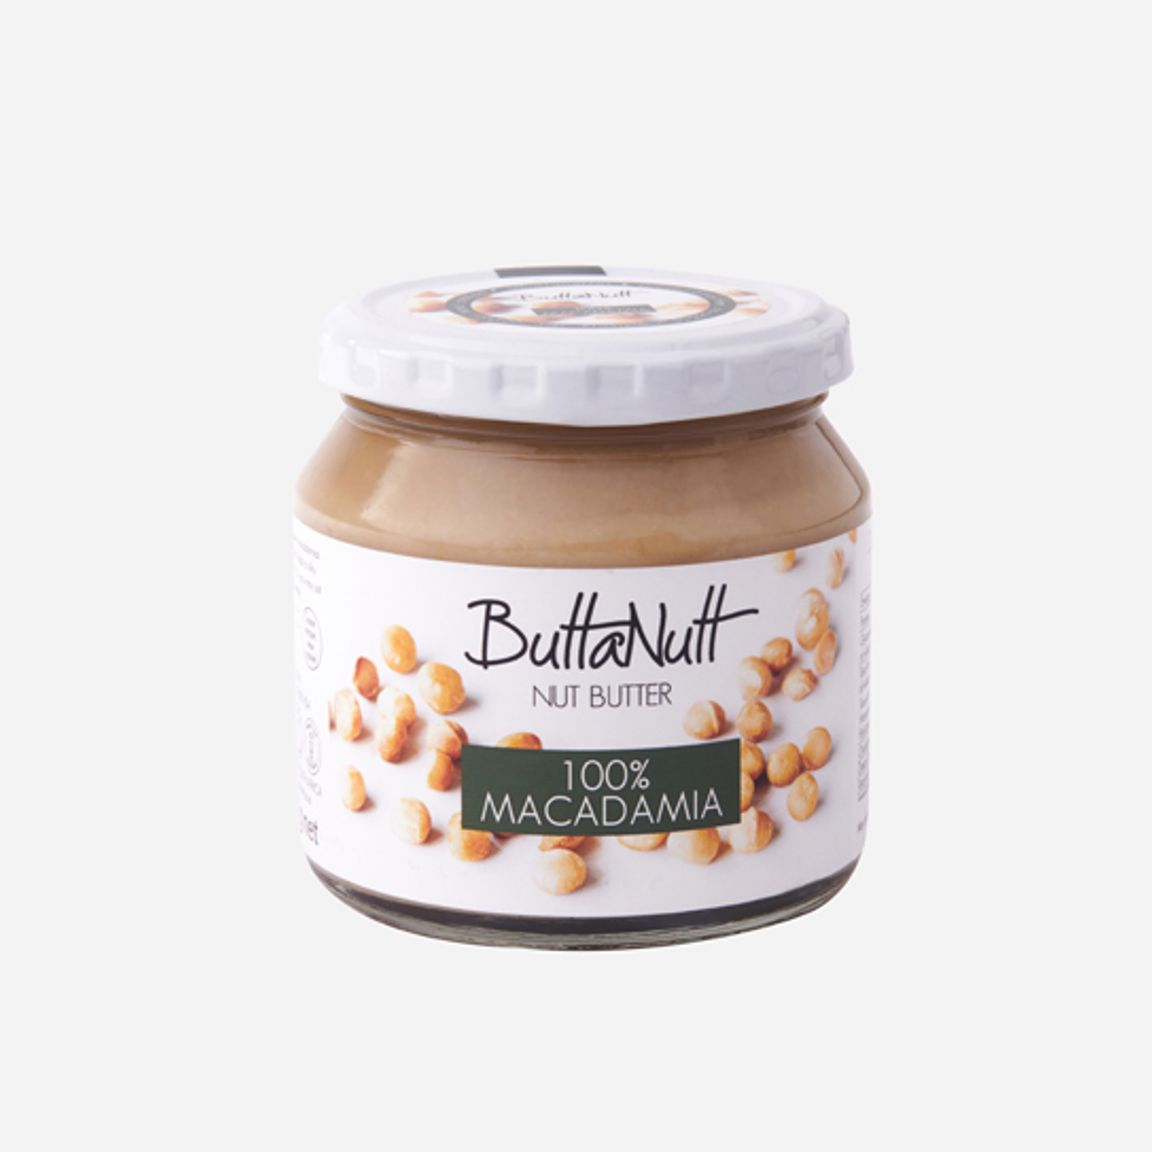 ButtaNutt Roasted Macadamia Nut Butter 250g Recipe & Ingredients